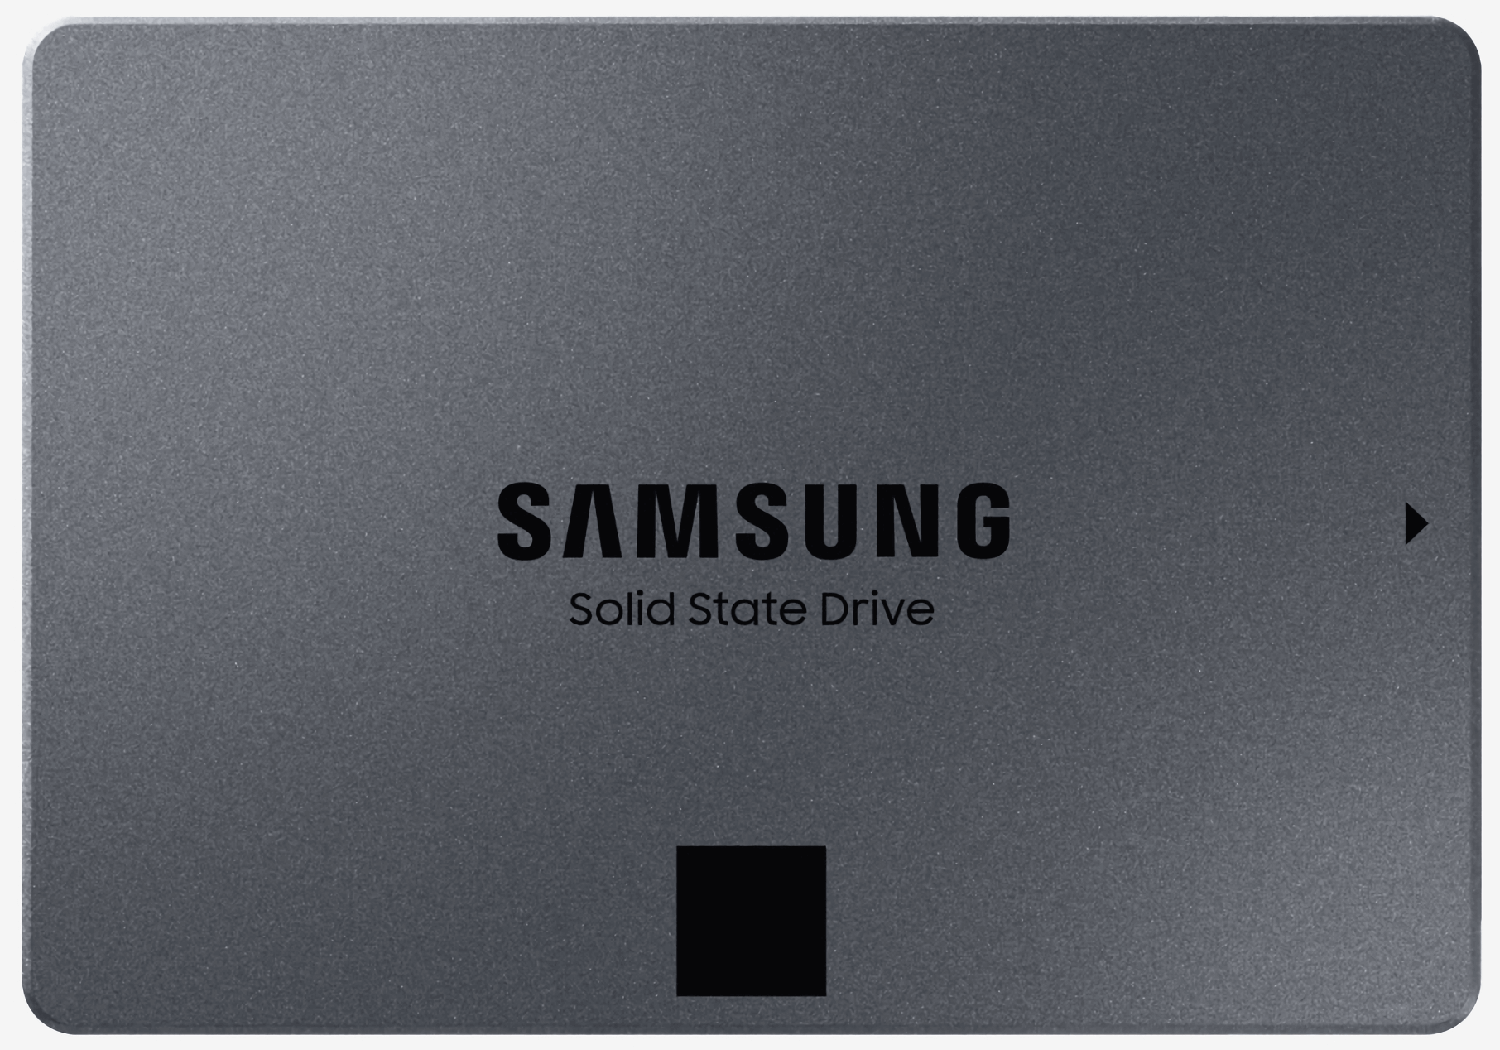 Samsung's new 870 QVO SATA line includes a monster 8TB SSD